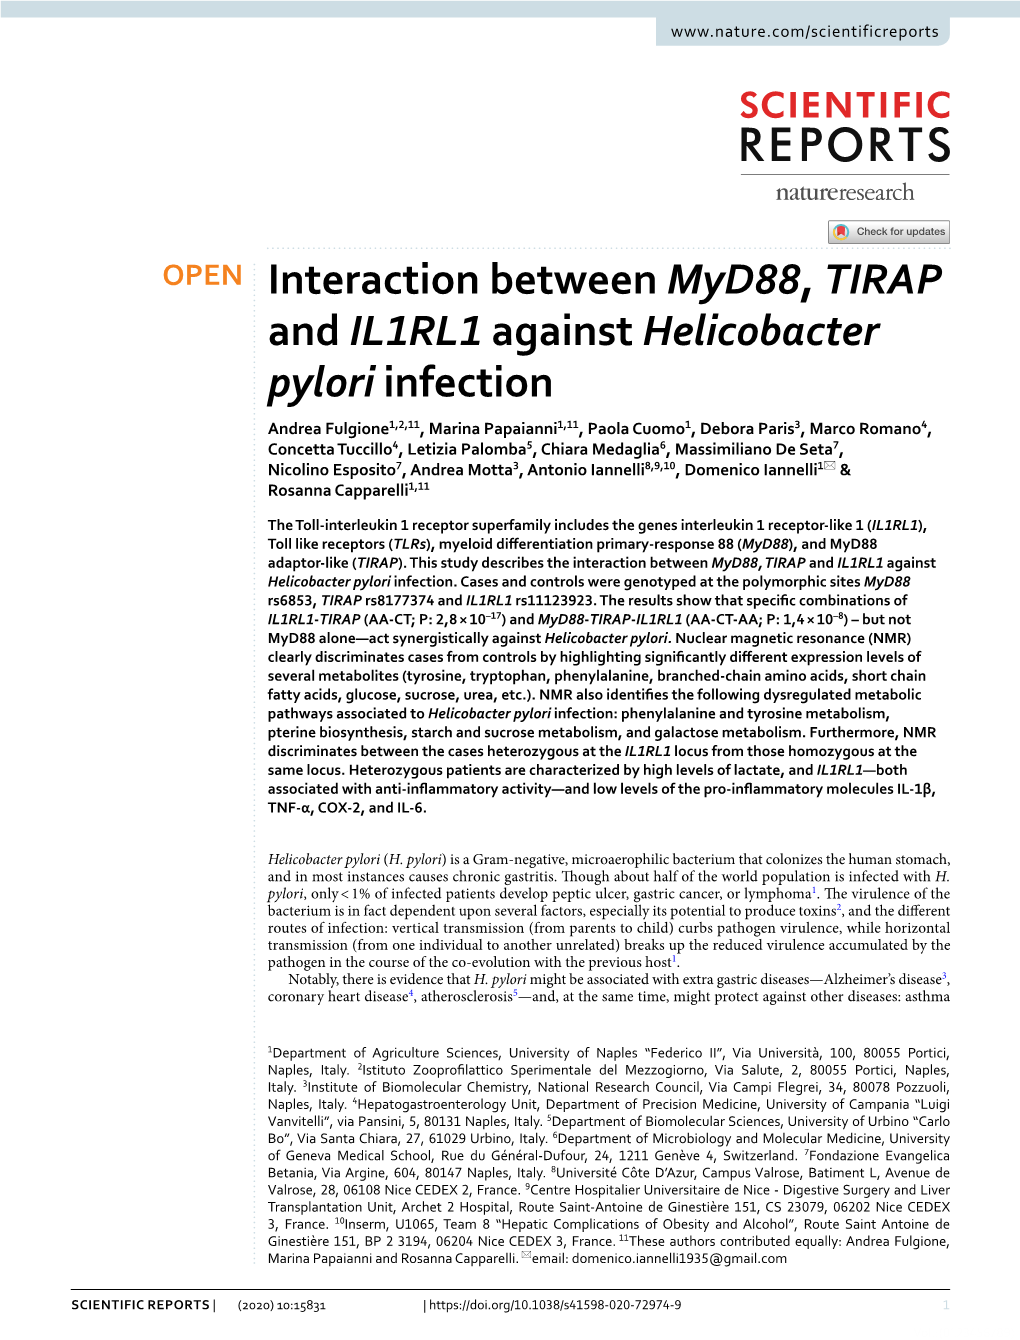 Interaction Between Myd88, TIRAP and IL1RL1 Against Helicobacter